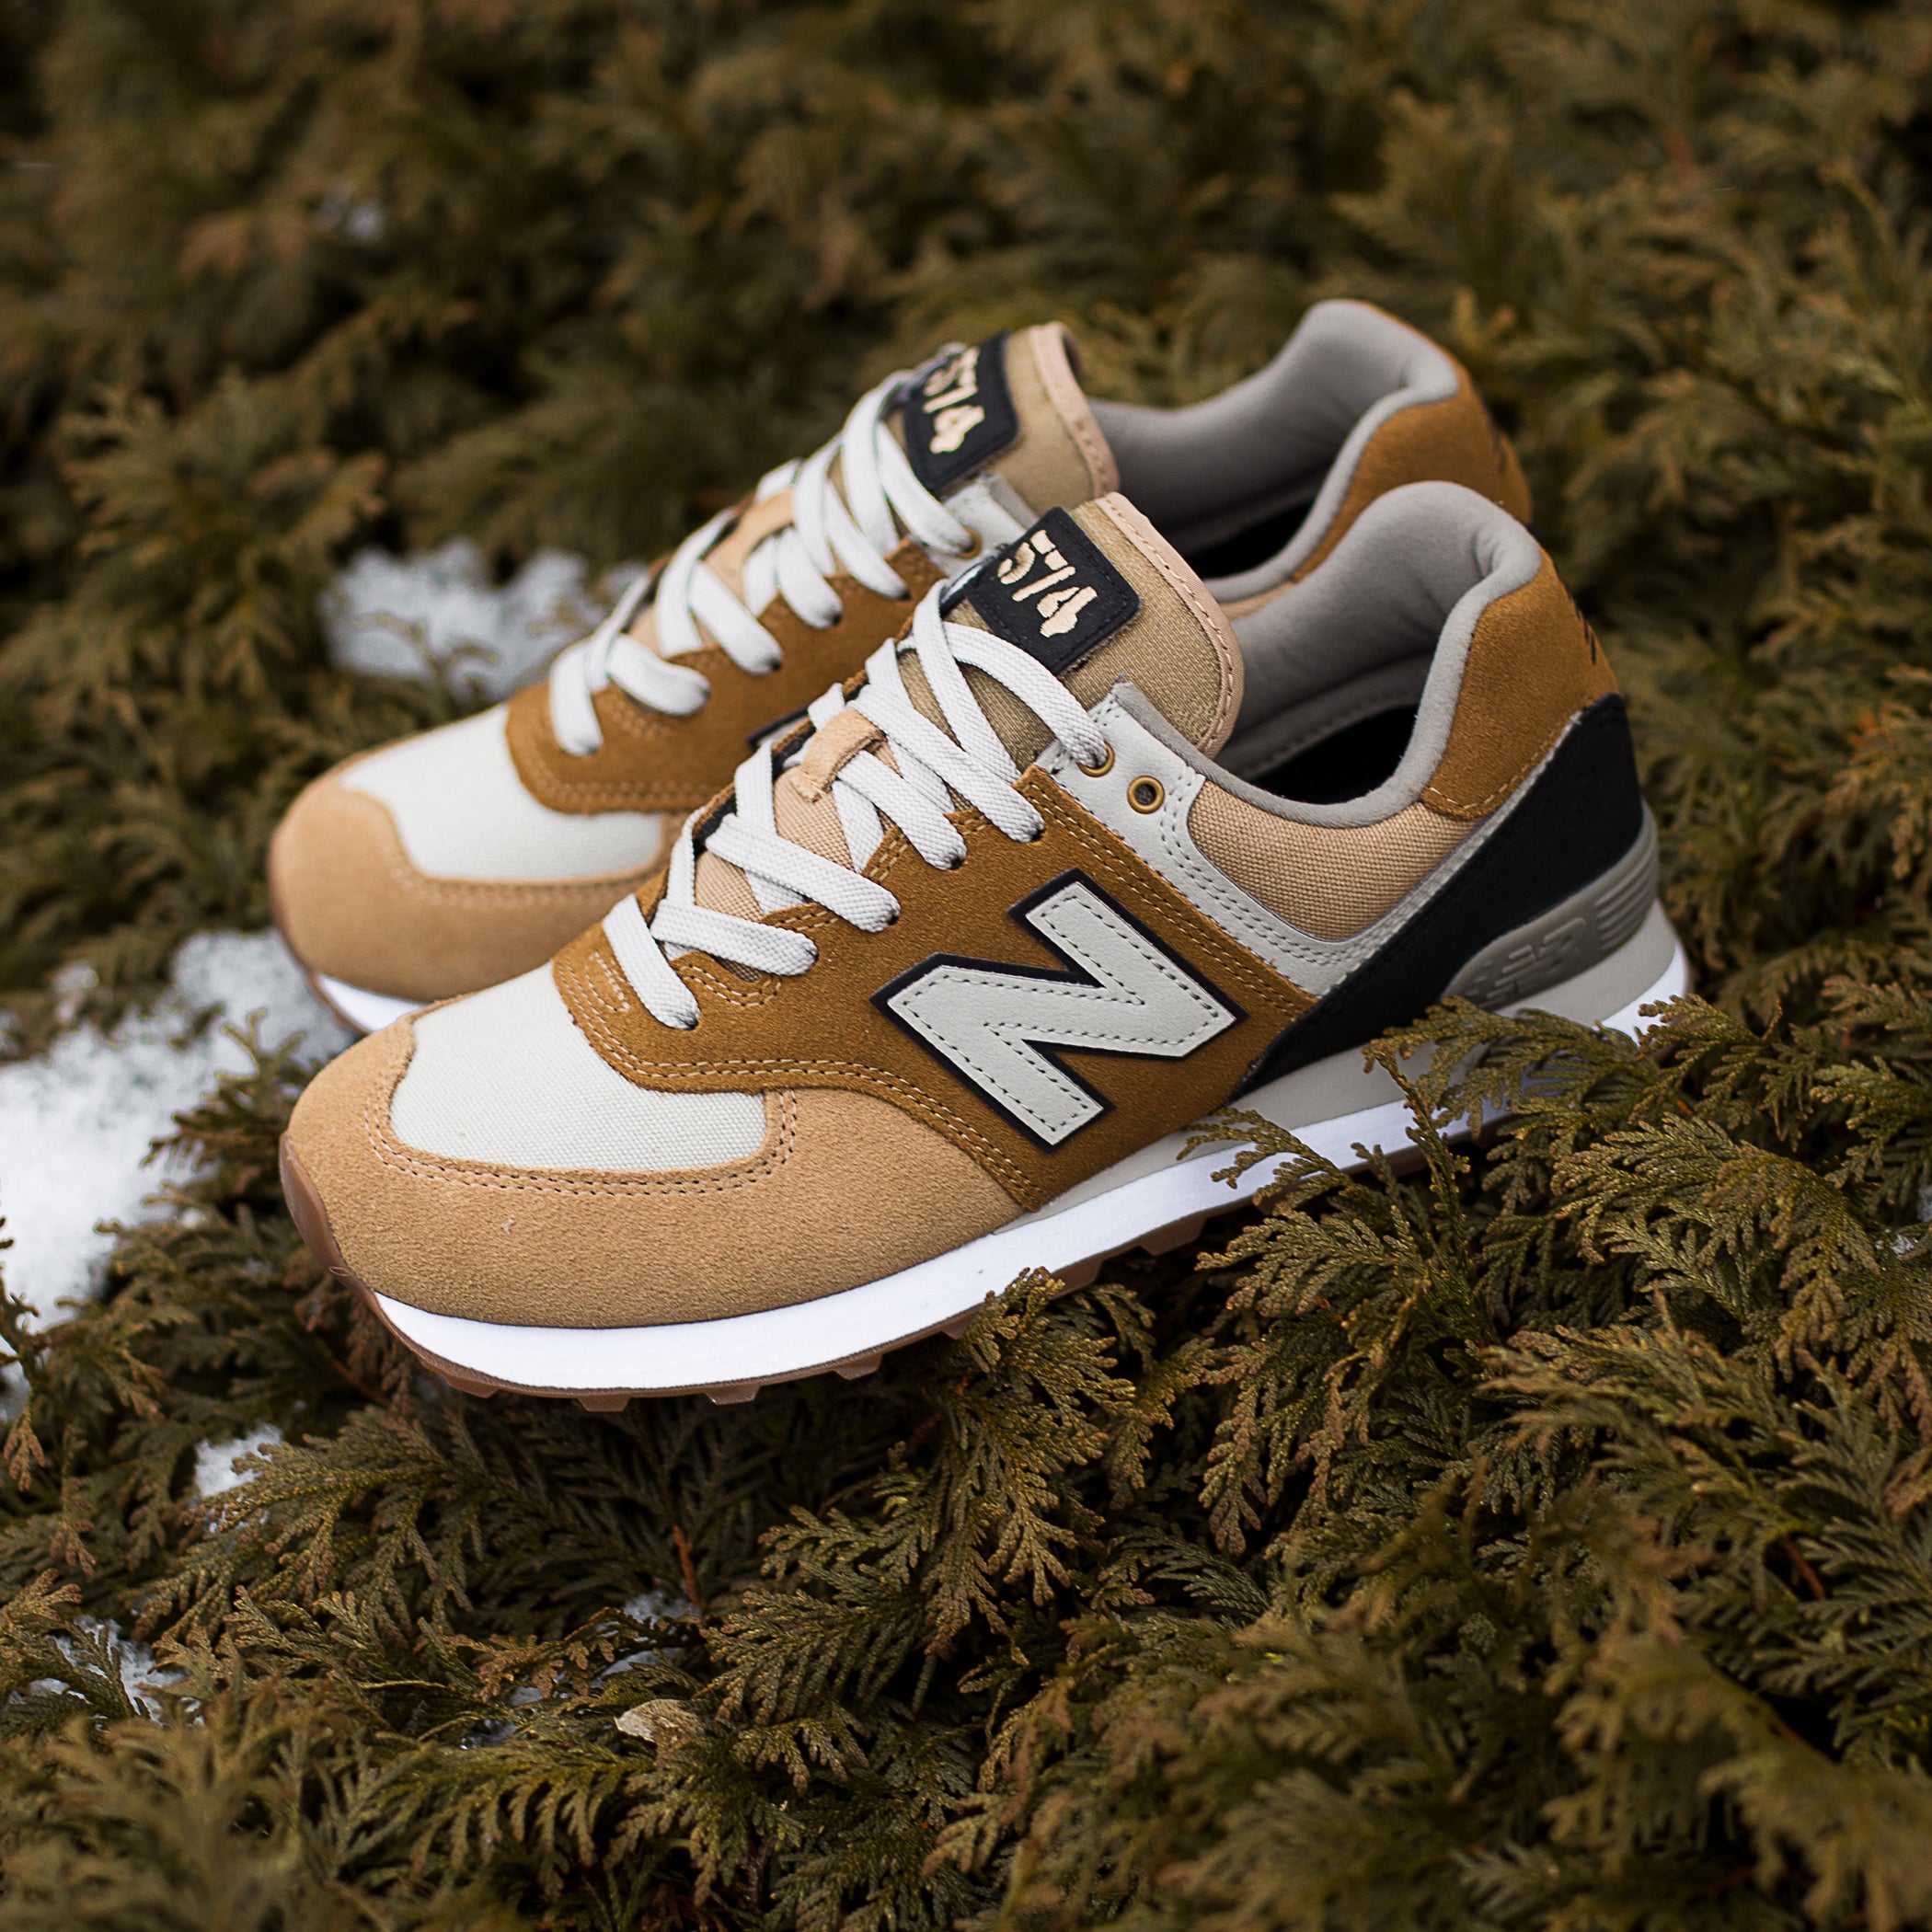 new balance 574 military patch